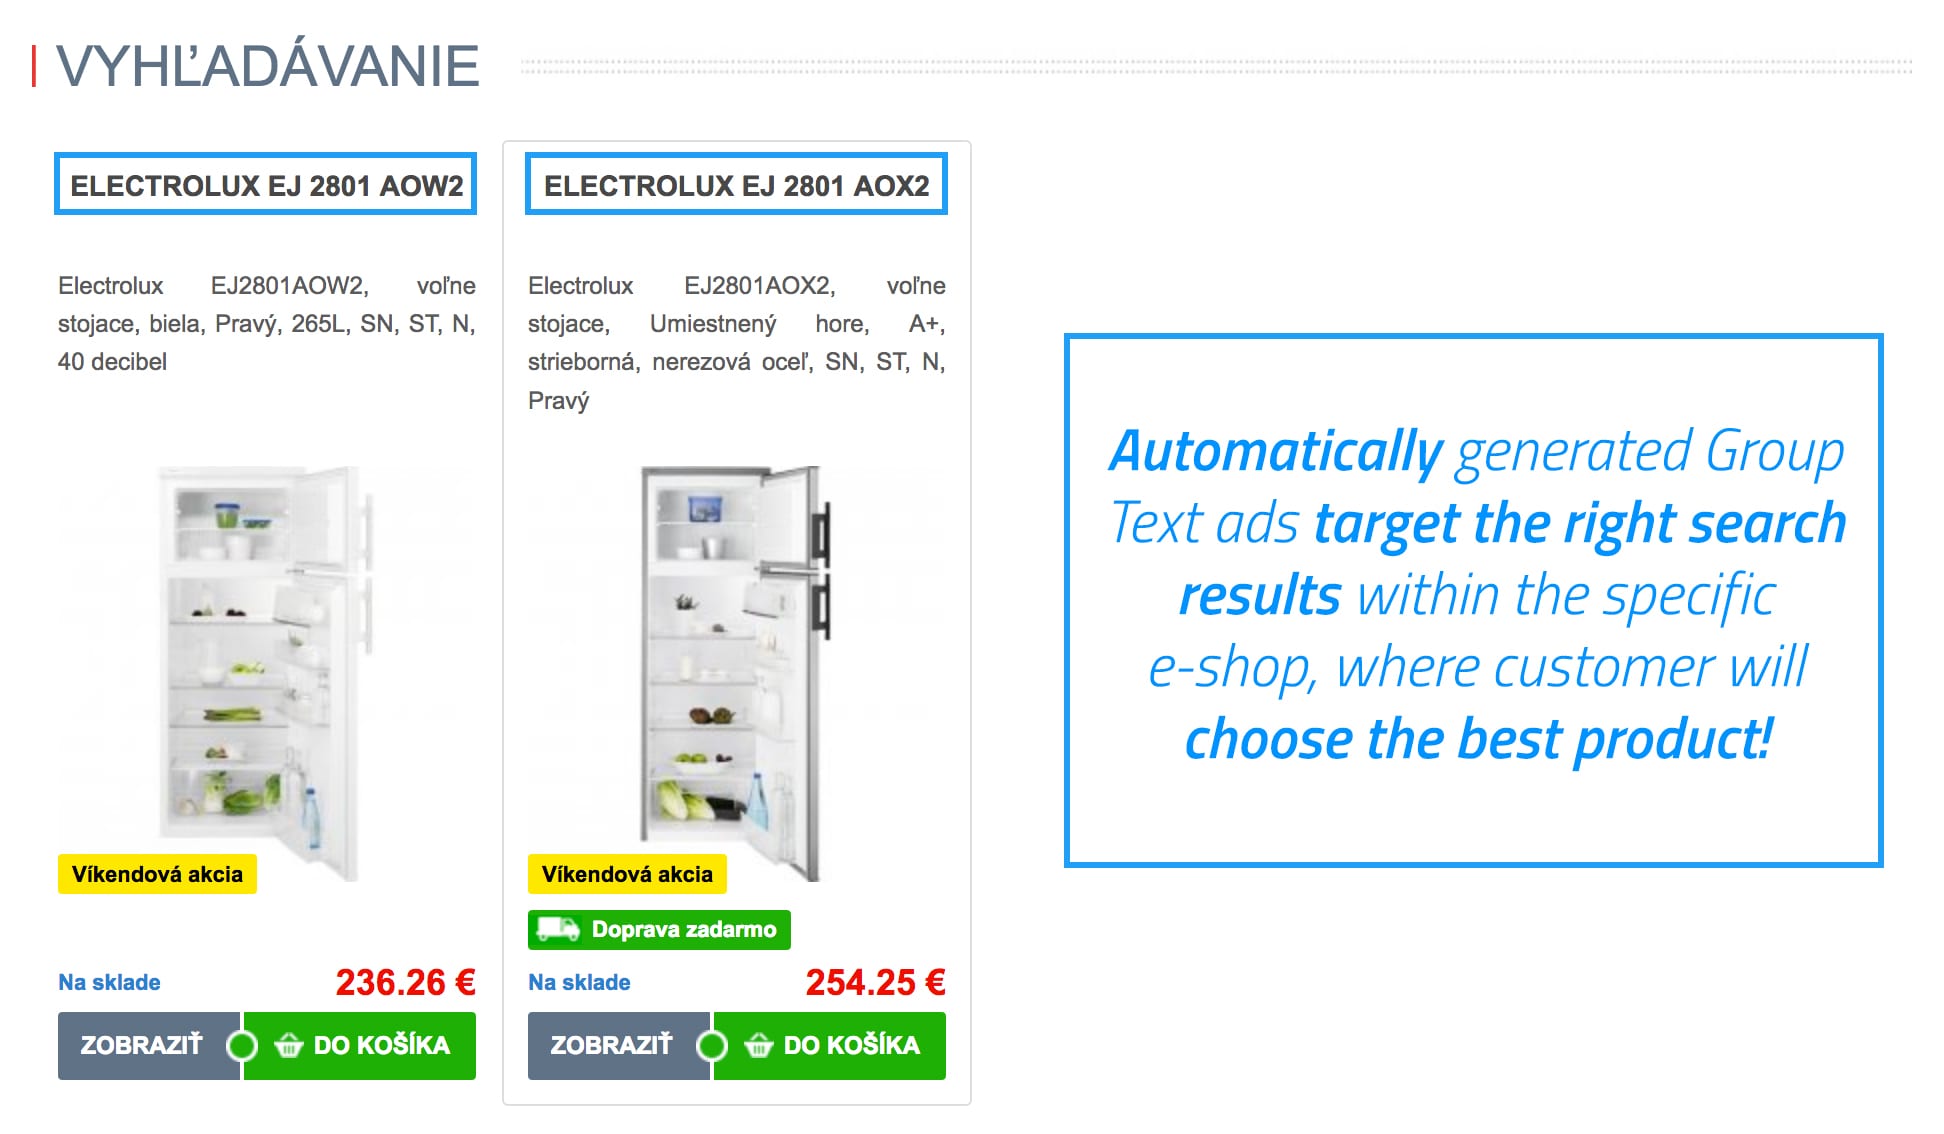 Automatically generated Product-Group Text ads will target the right fulltext search results within eshop, where customer will choose the best product